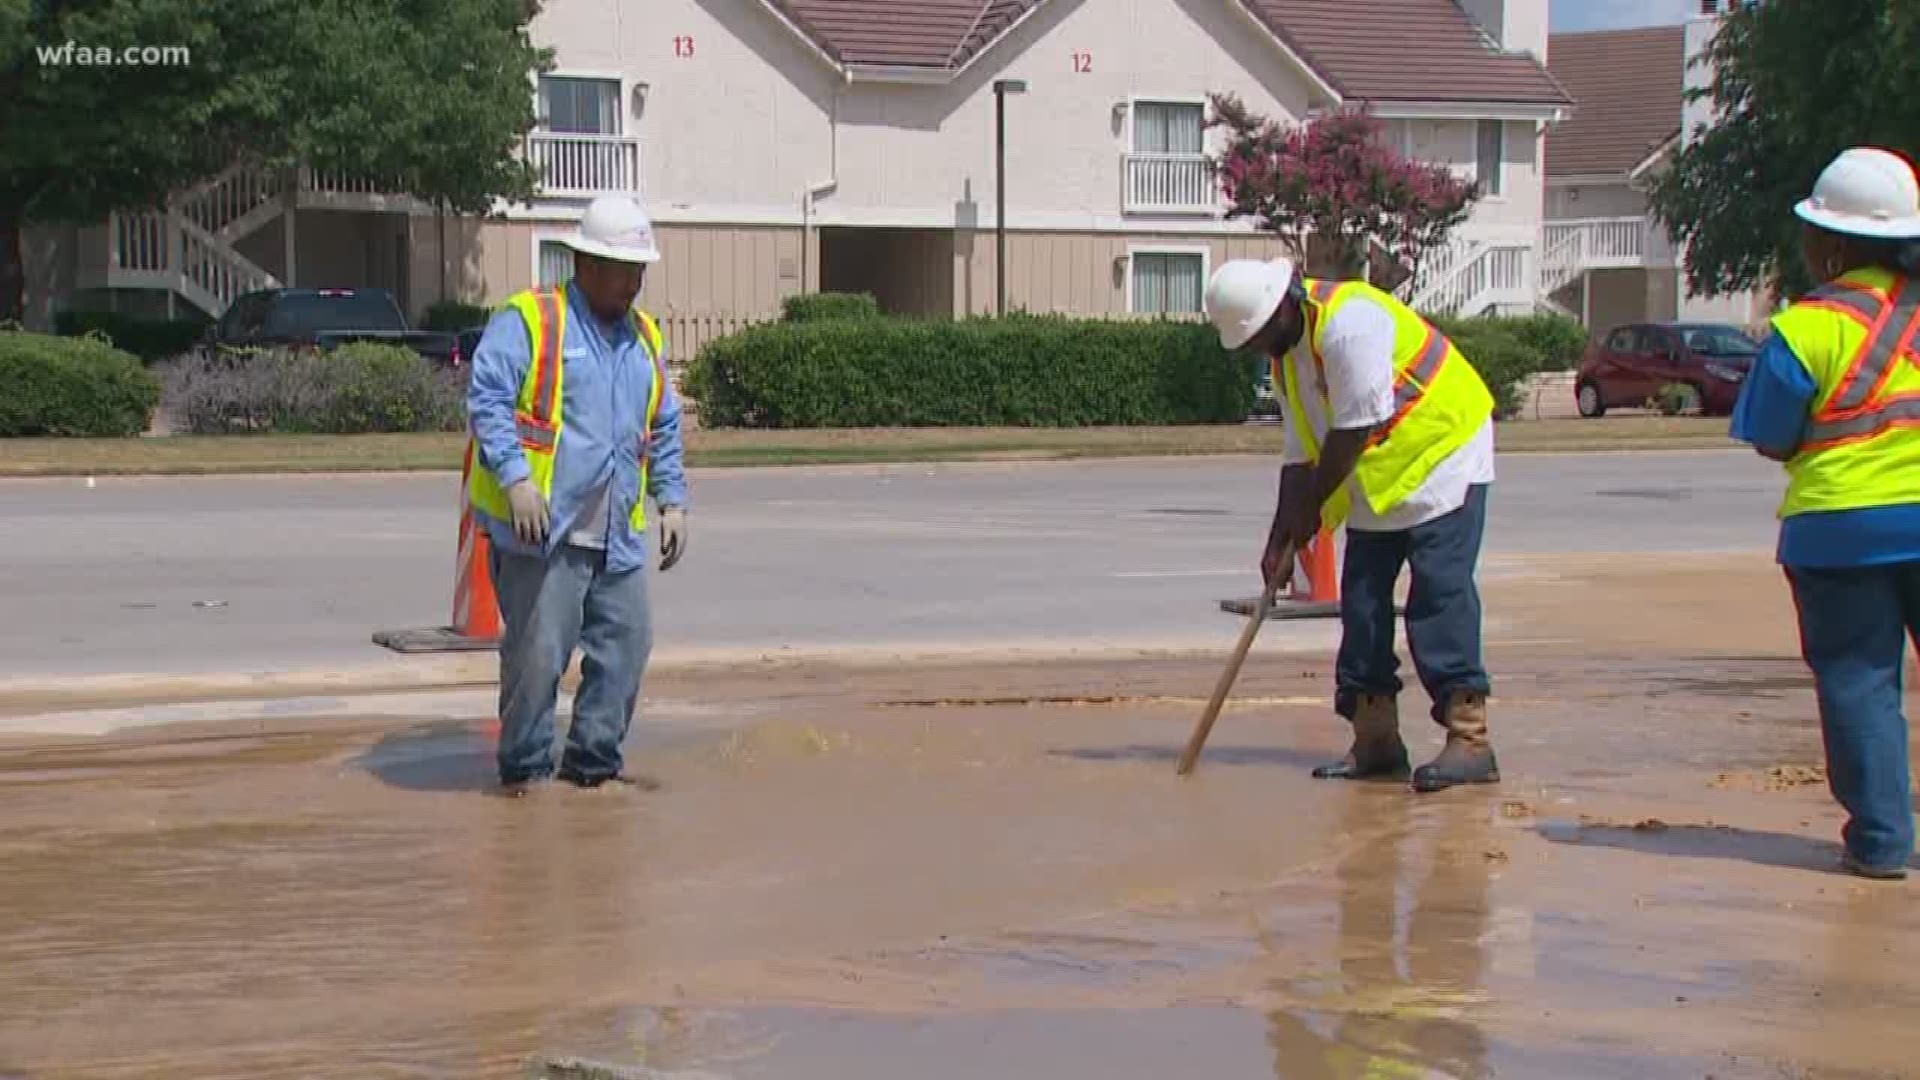 A large sink hole formed on University Drive in Fort Worth after a water main break Sunday. Todd Unger reports.